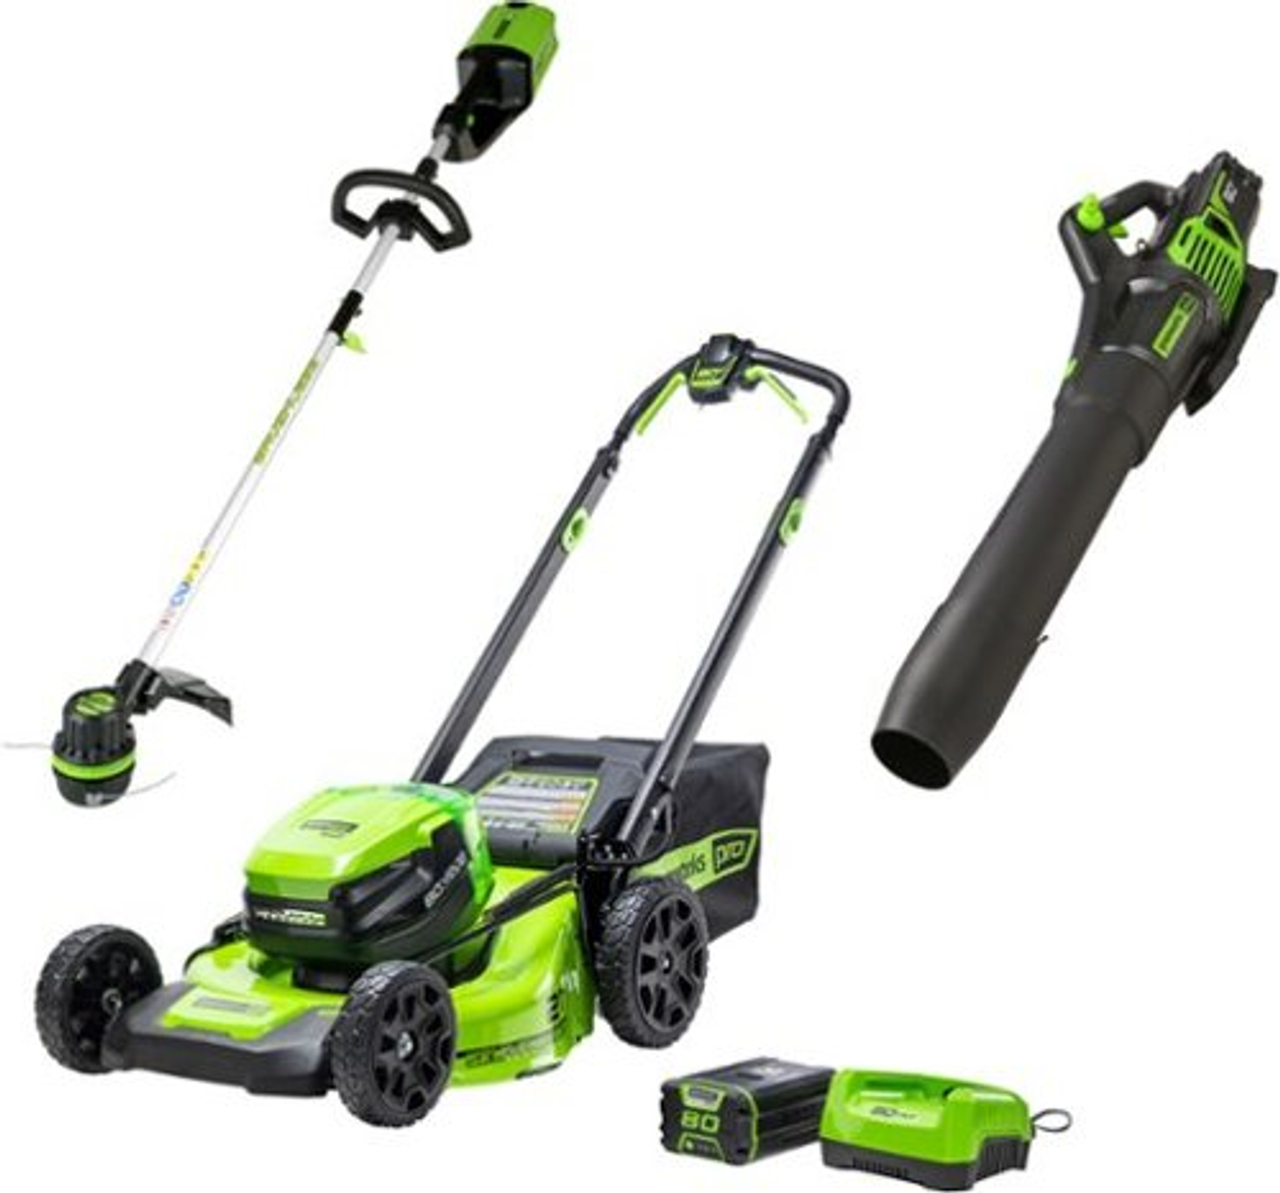 Greenworks - 80-Volt 21" Mower, 13" String Trimmer, & 730 CFM Blower (4.0 Ah Battery & Charger Included) Ultimate Outdoor Combo Kit - Green